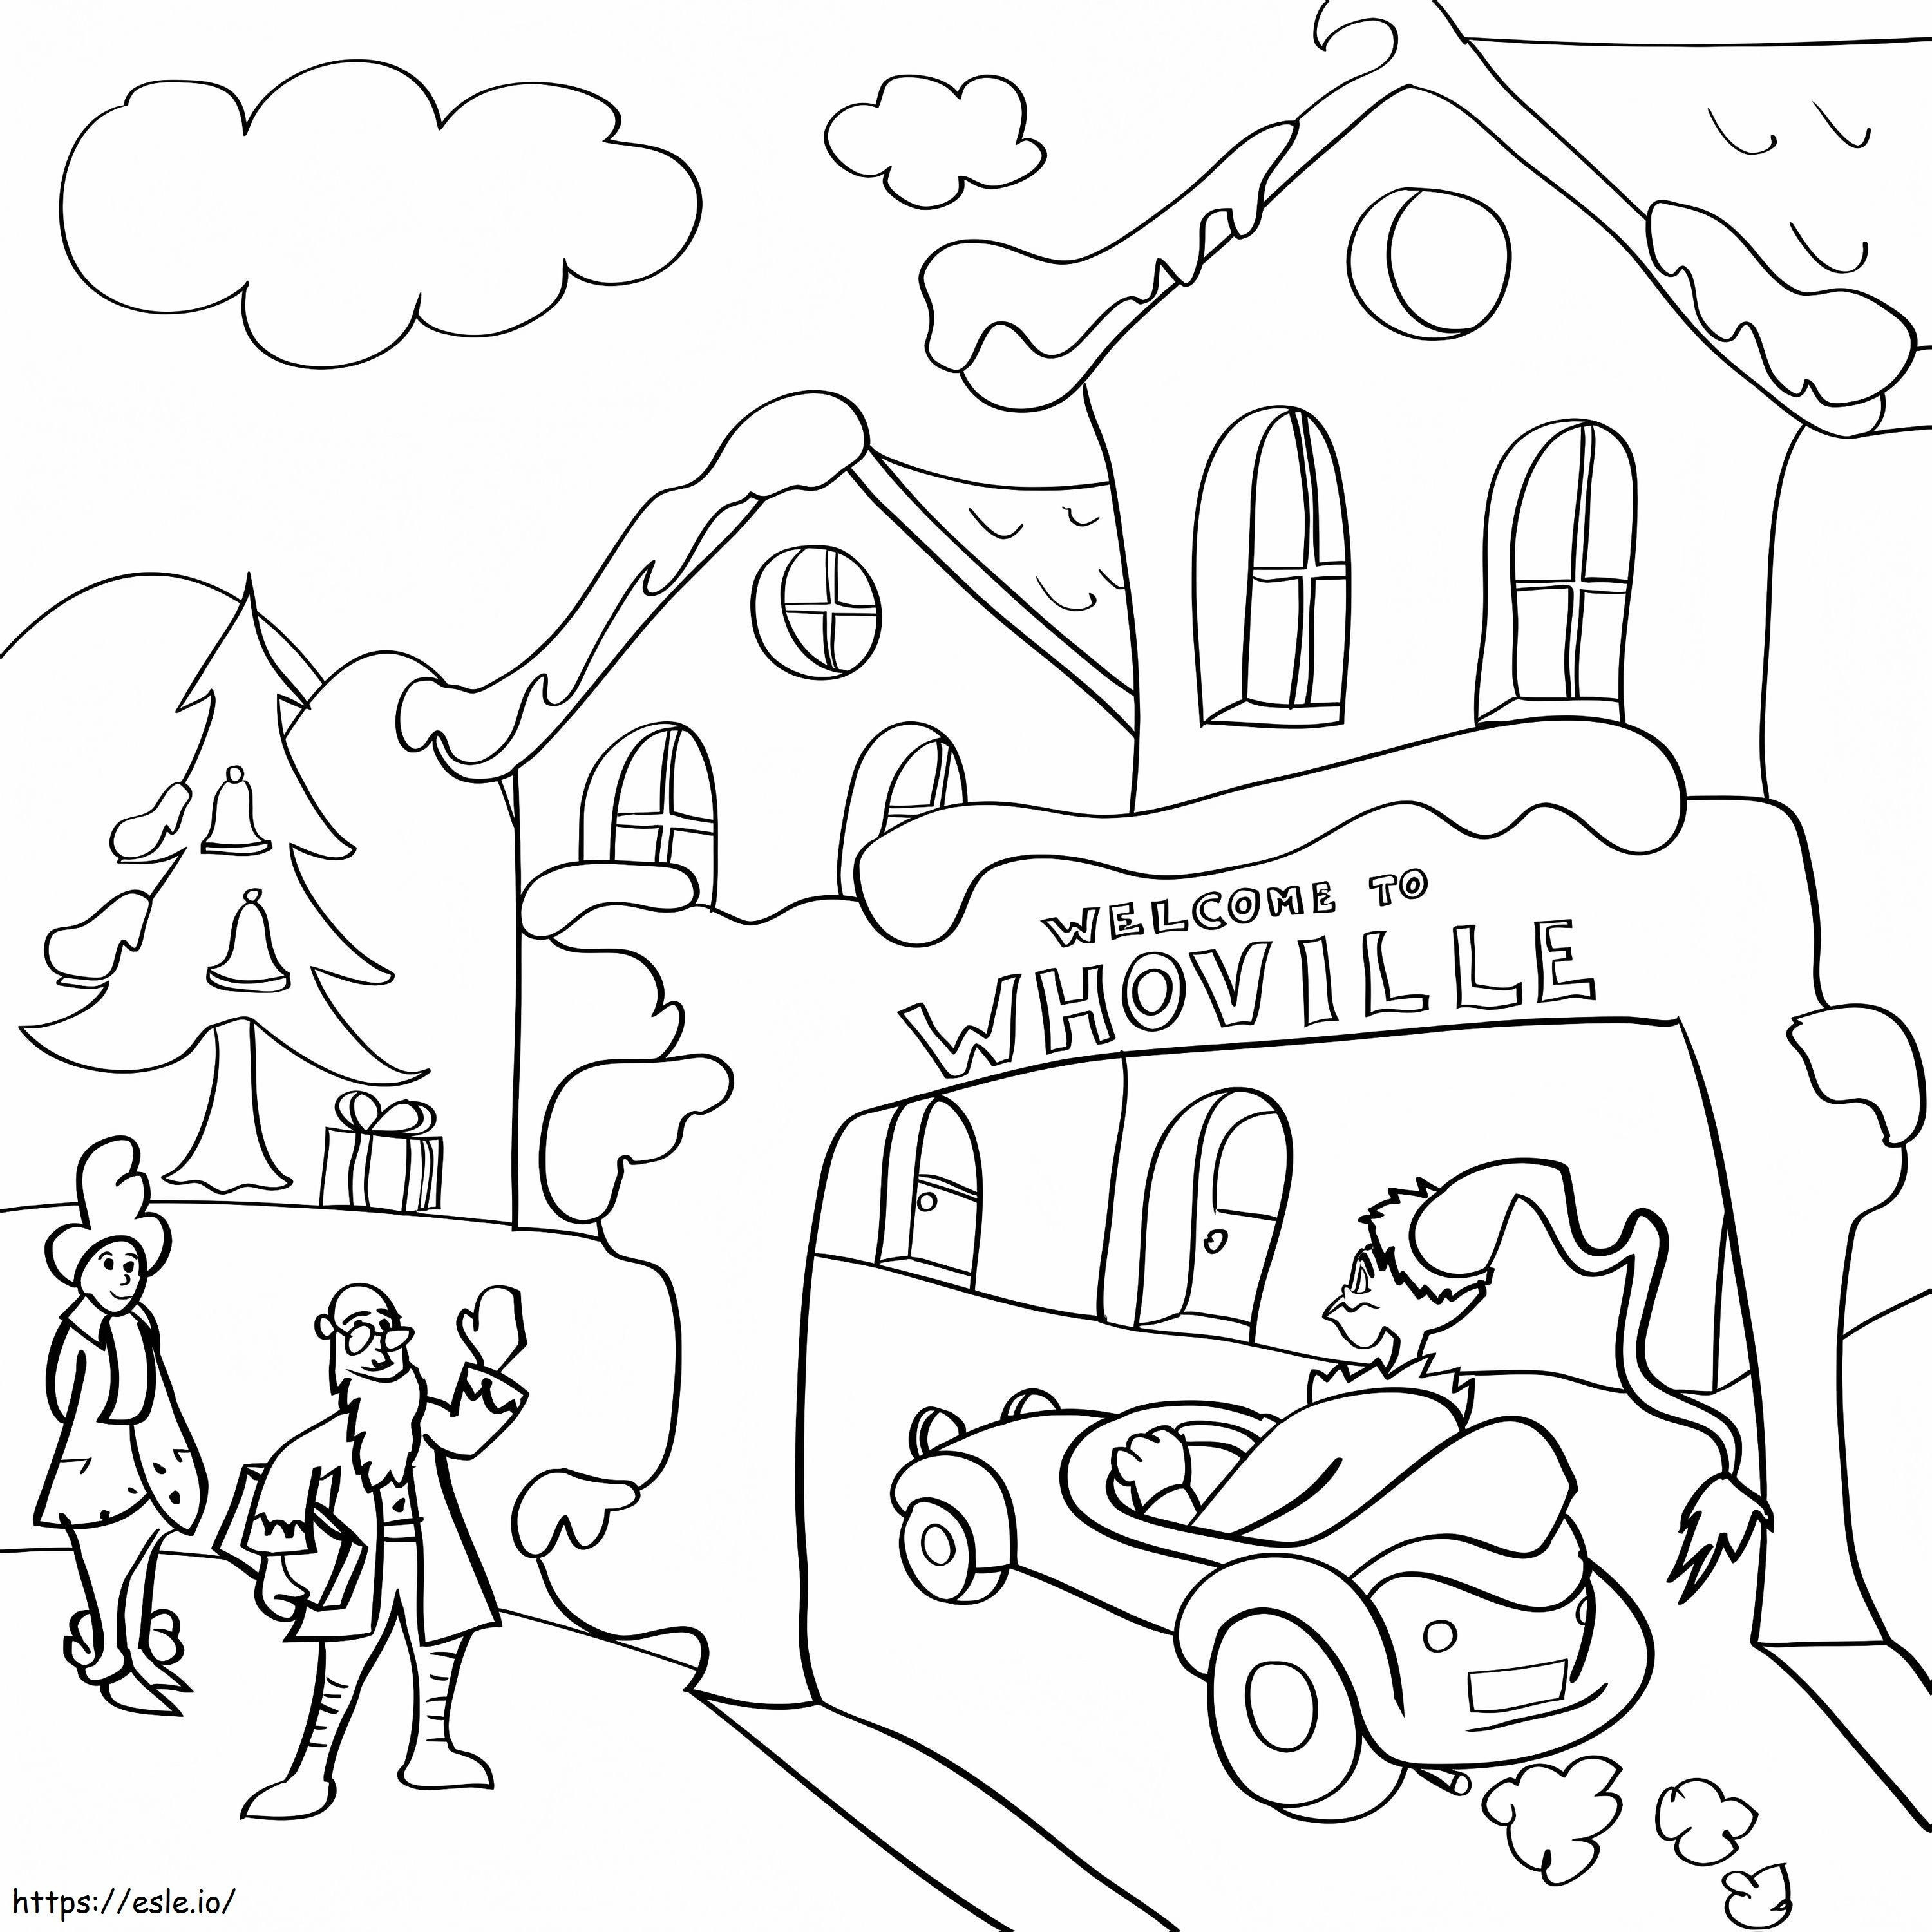 Welcome To Whoville coloring page